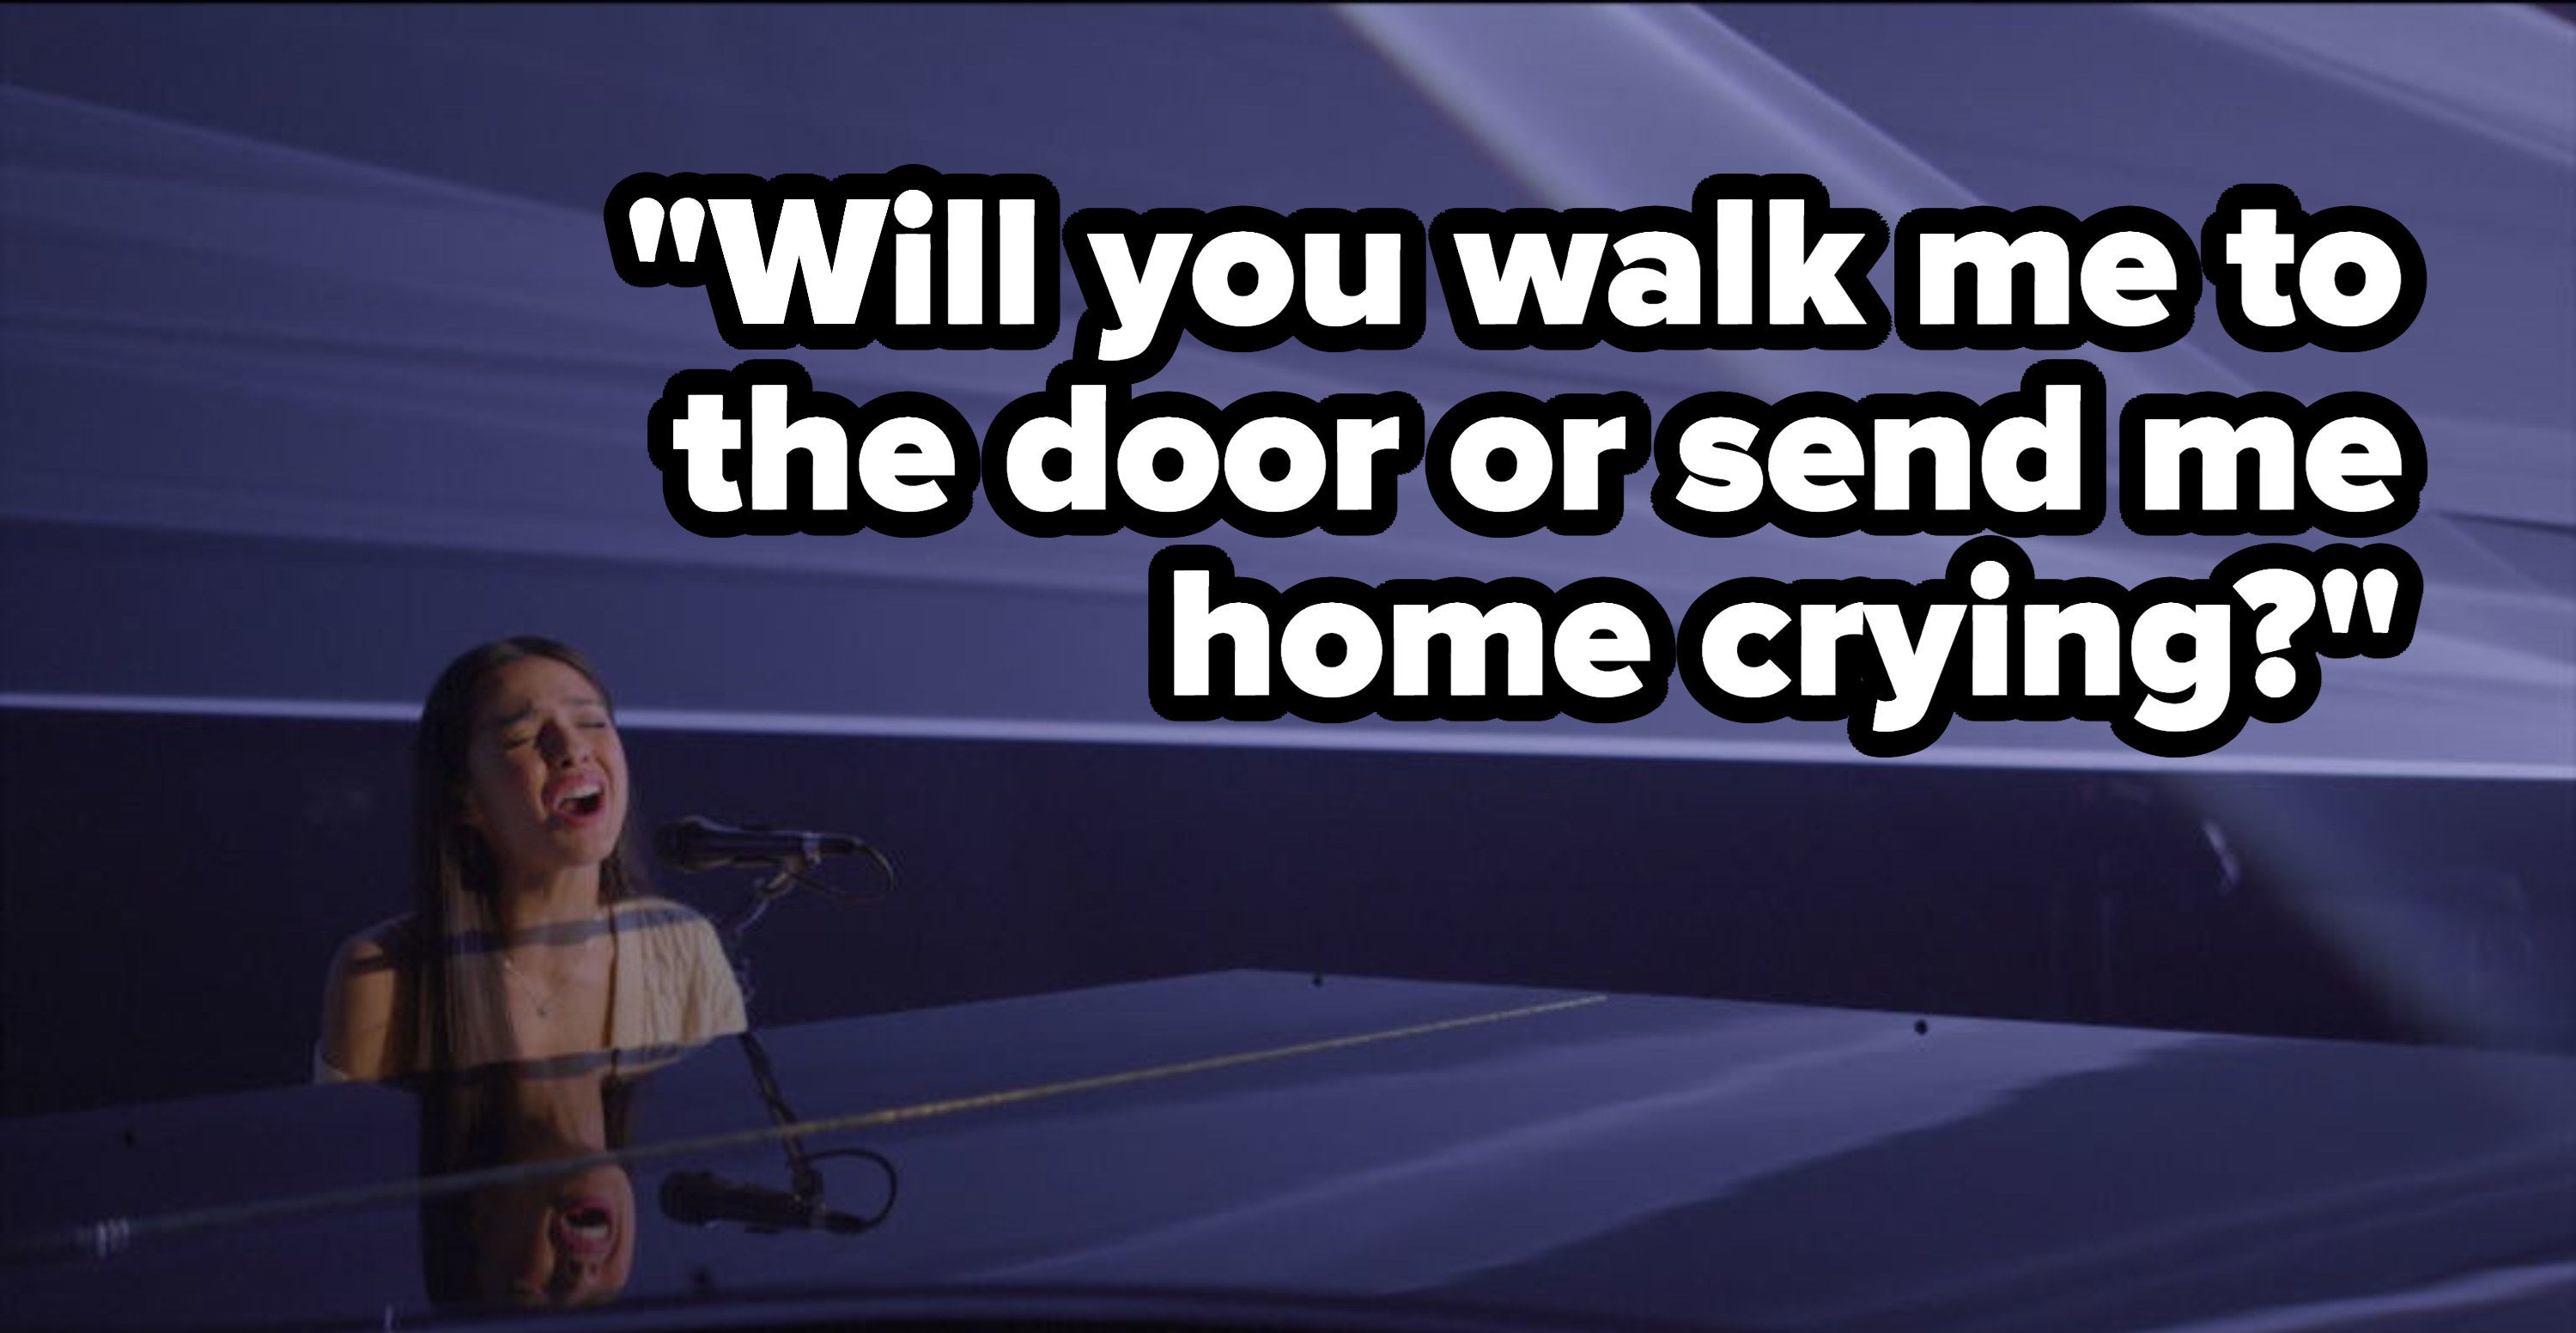 &quot;Will you walk me to the door or send me home crying?&quot;